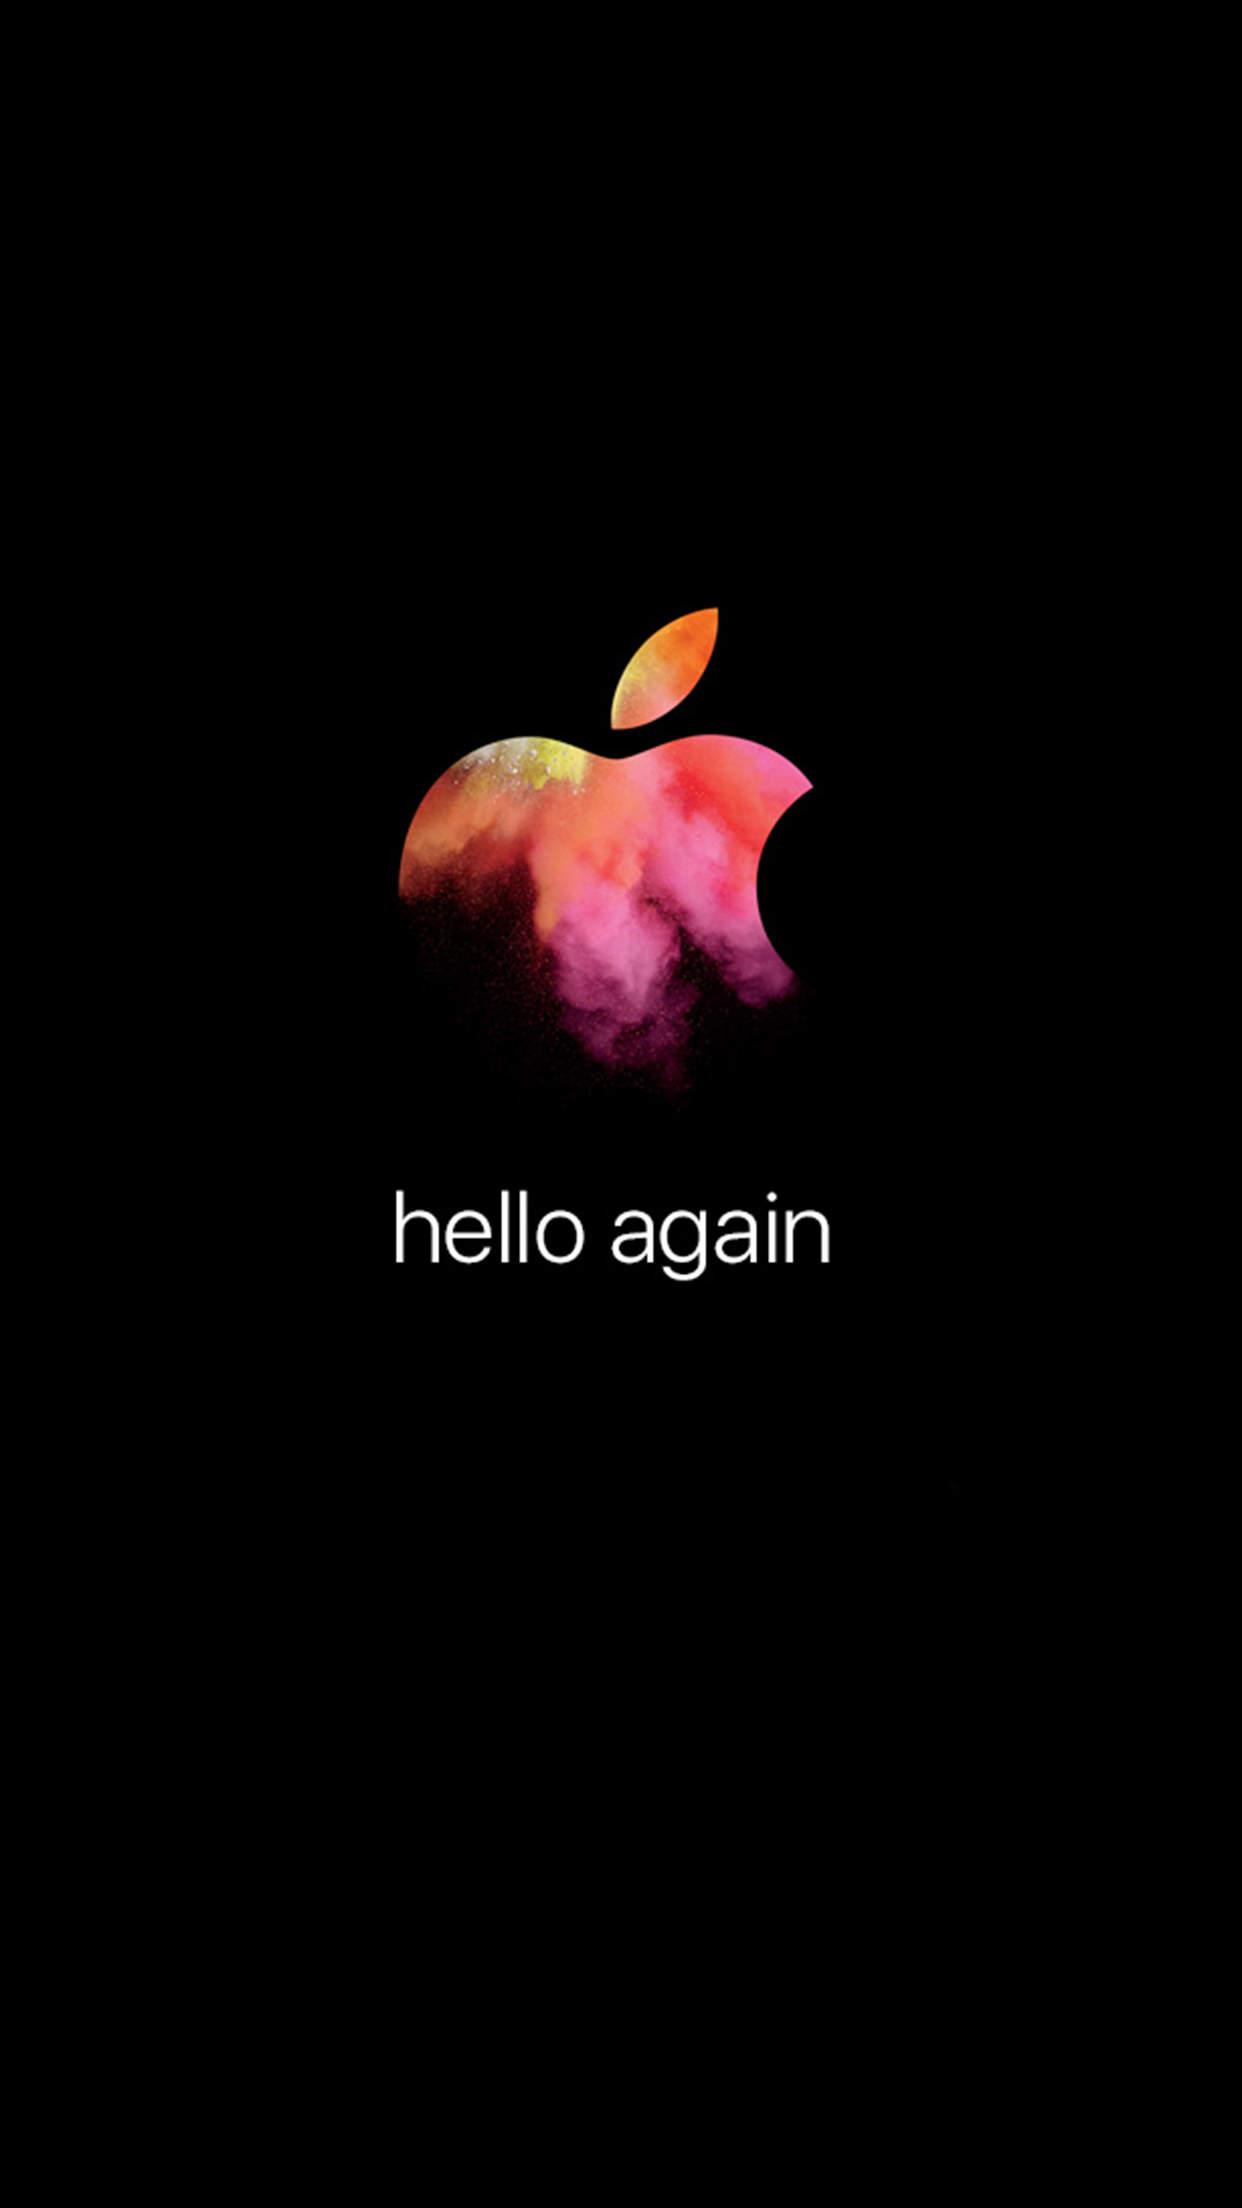 Get Ready For Apple S Mac Event With These Wallpaper Cult Of